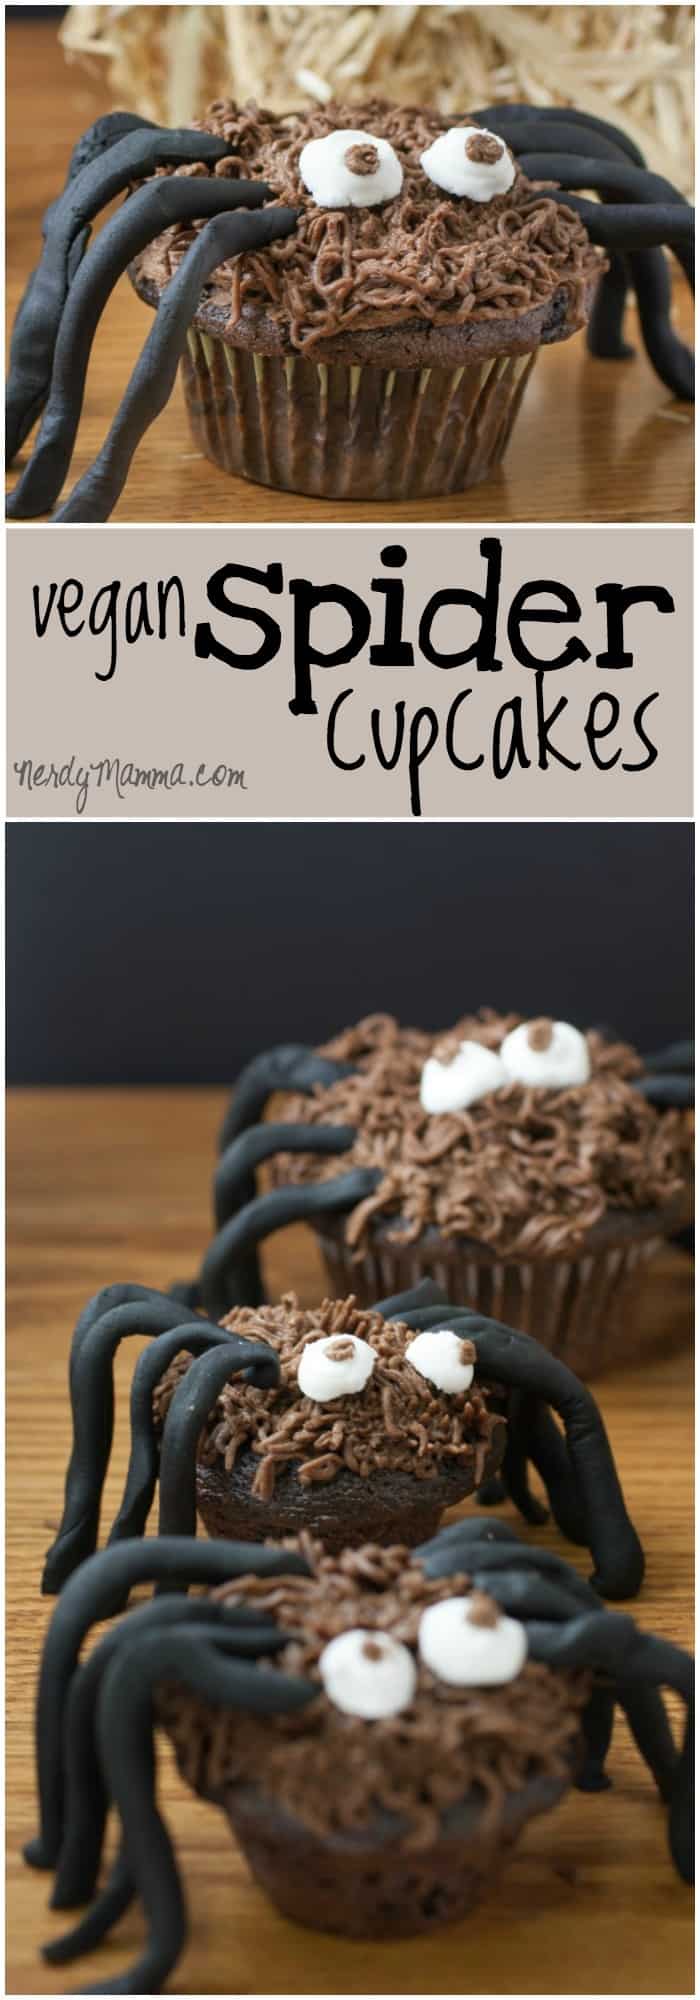 My kids adored yjese easy spider cupcakes for Halloween. Egg free and dairy free, too!